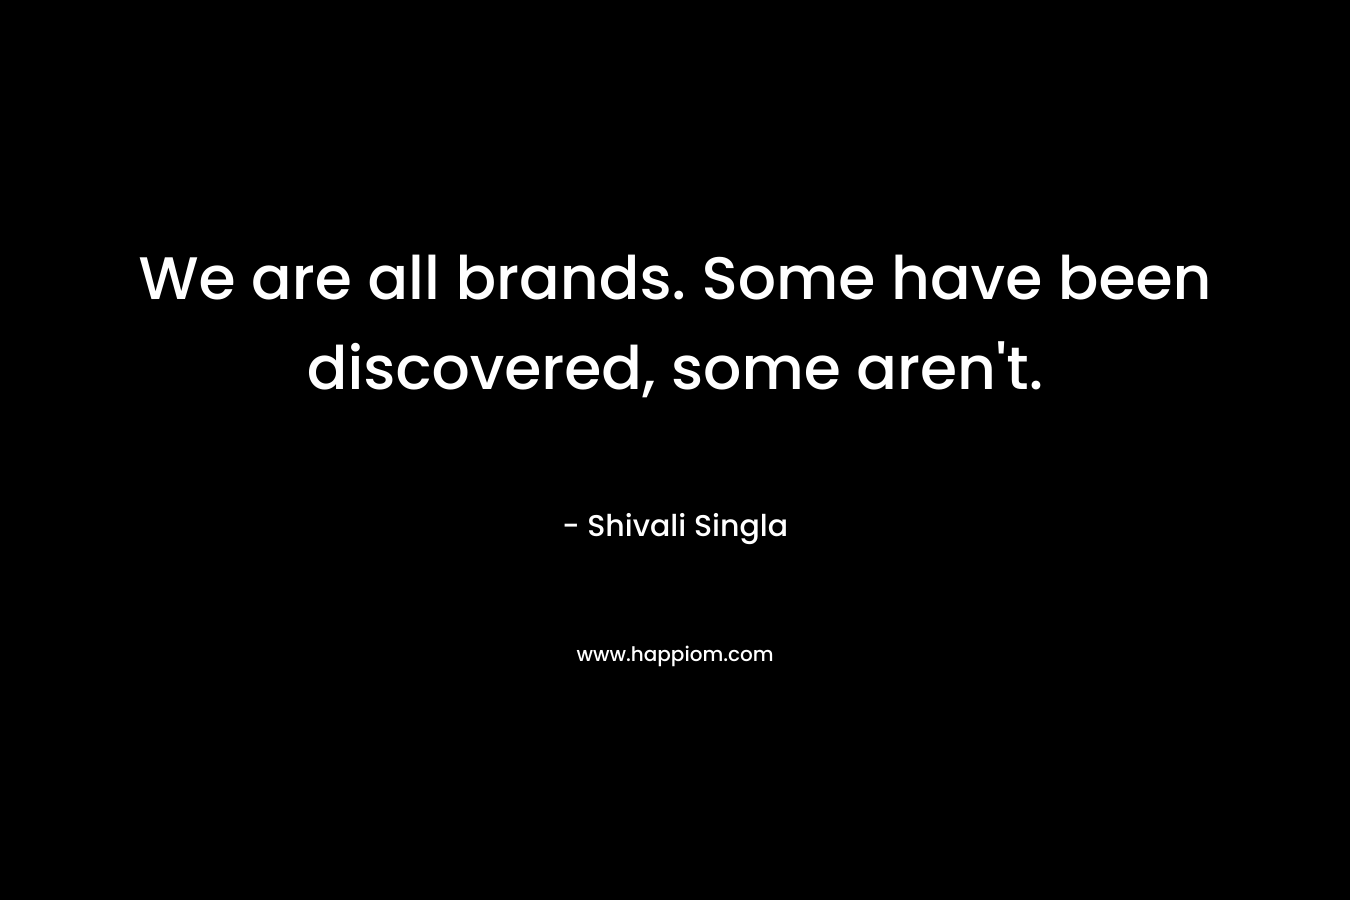 We are all brands. Some have been discovered, some aren’t. – Shivali Singla